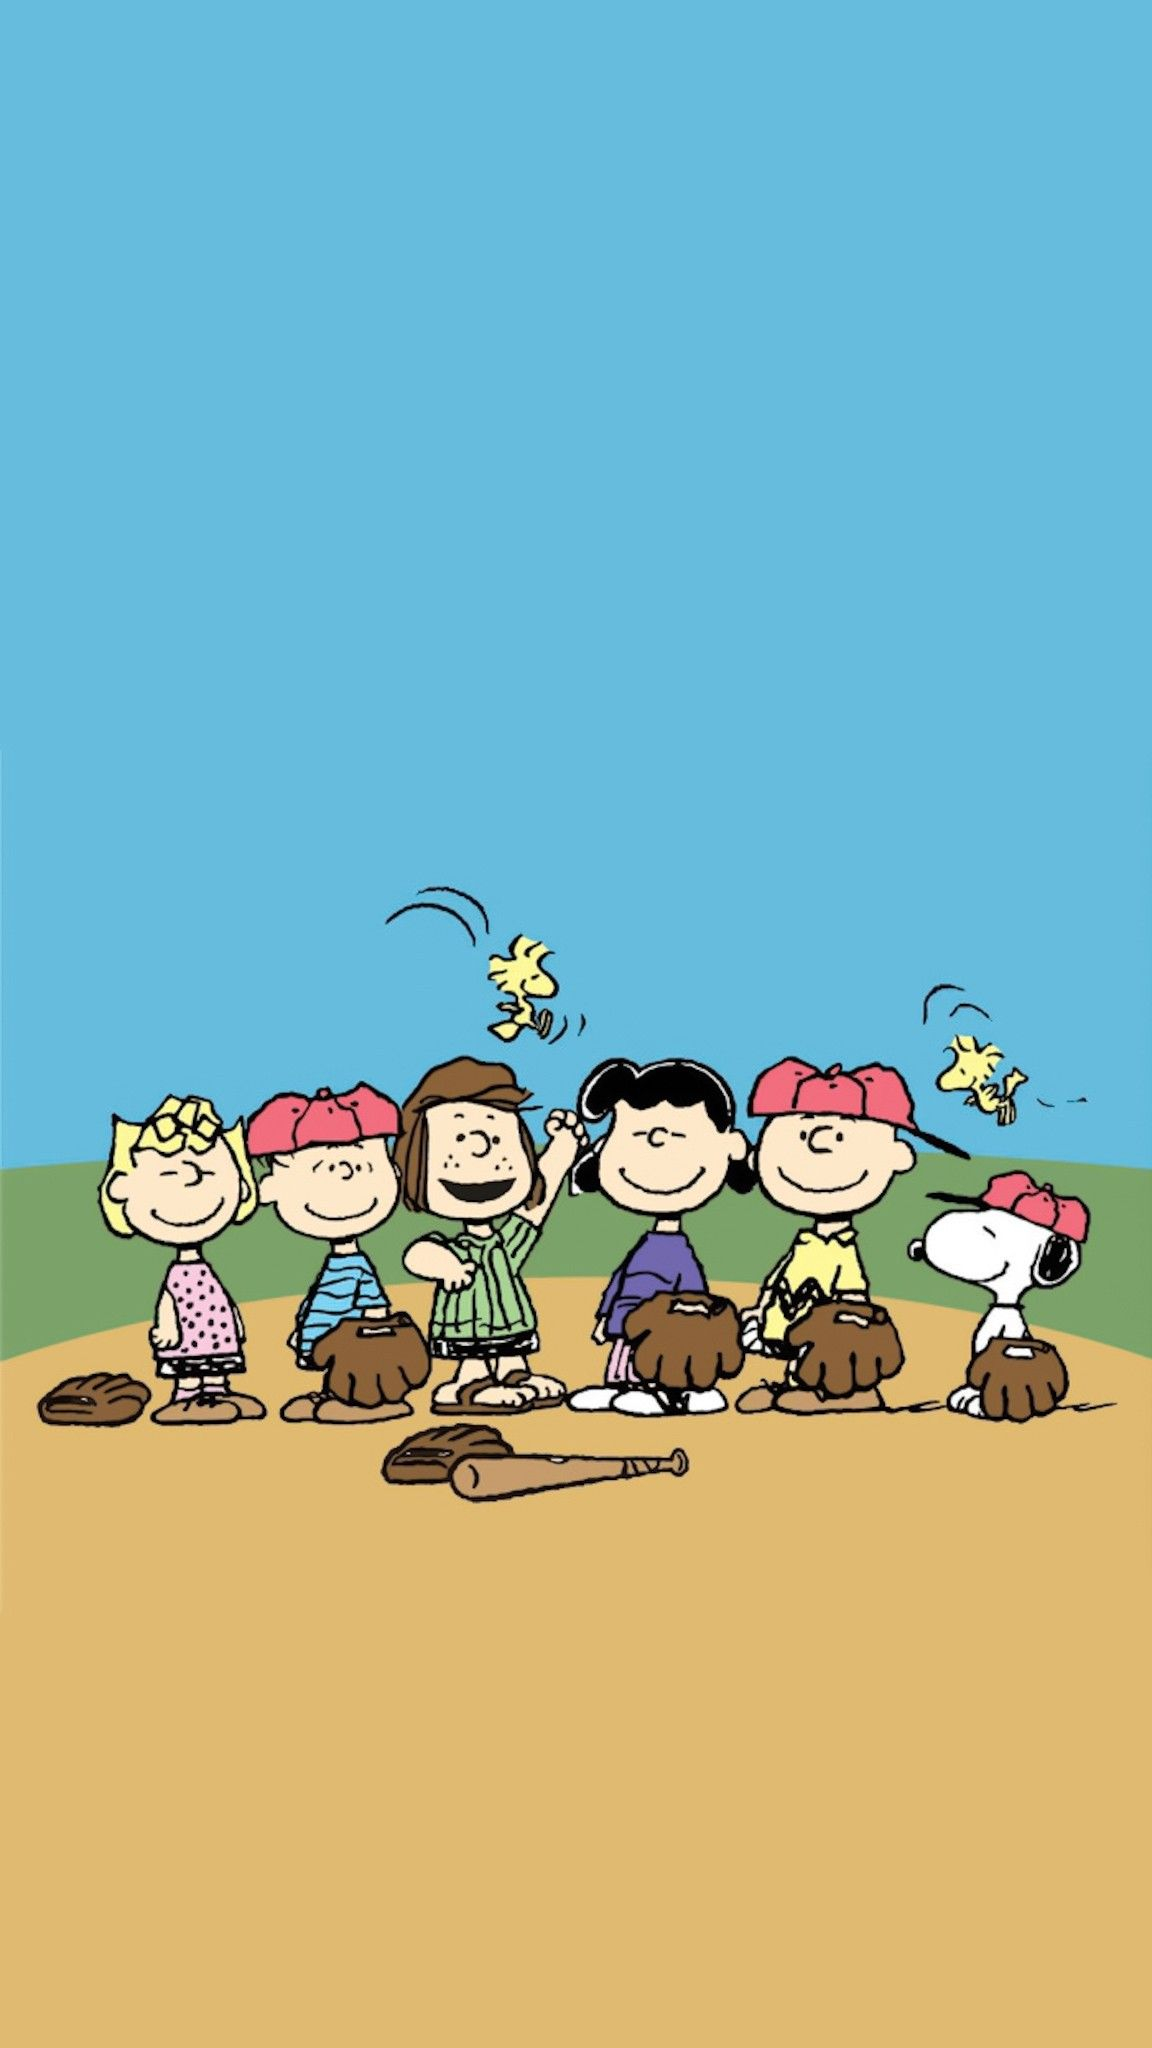 1152x2048 Pin by Aekkalisa on Snoopy | Snoopy wallpaper, Snoopy pictures, Peanuts wallpaper